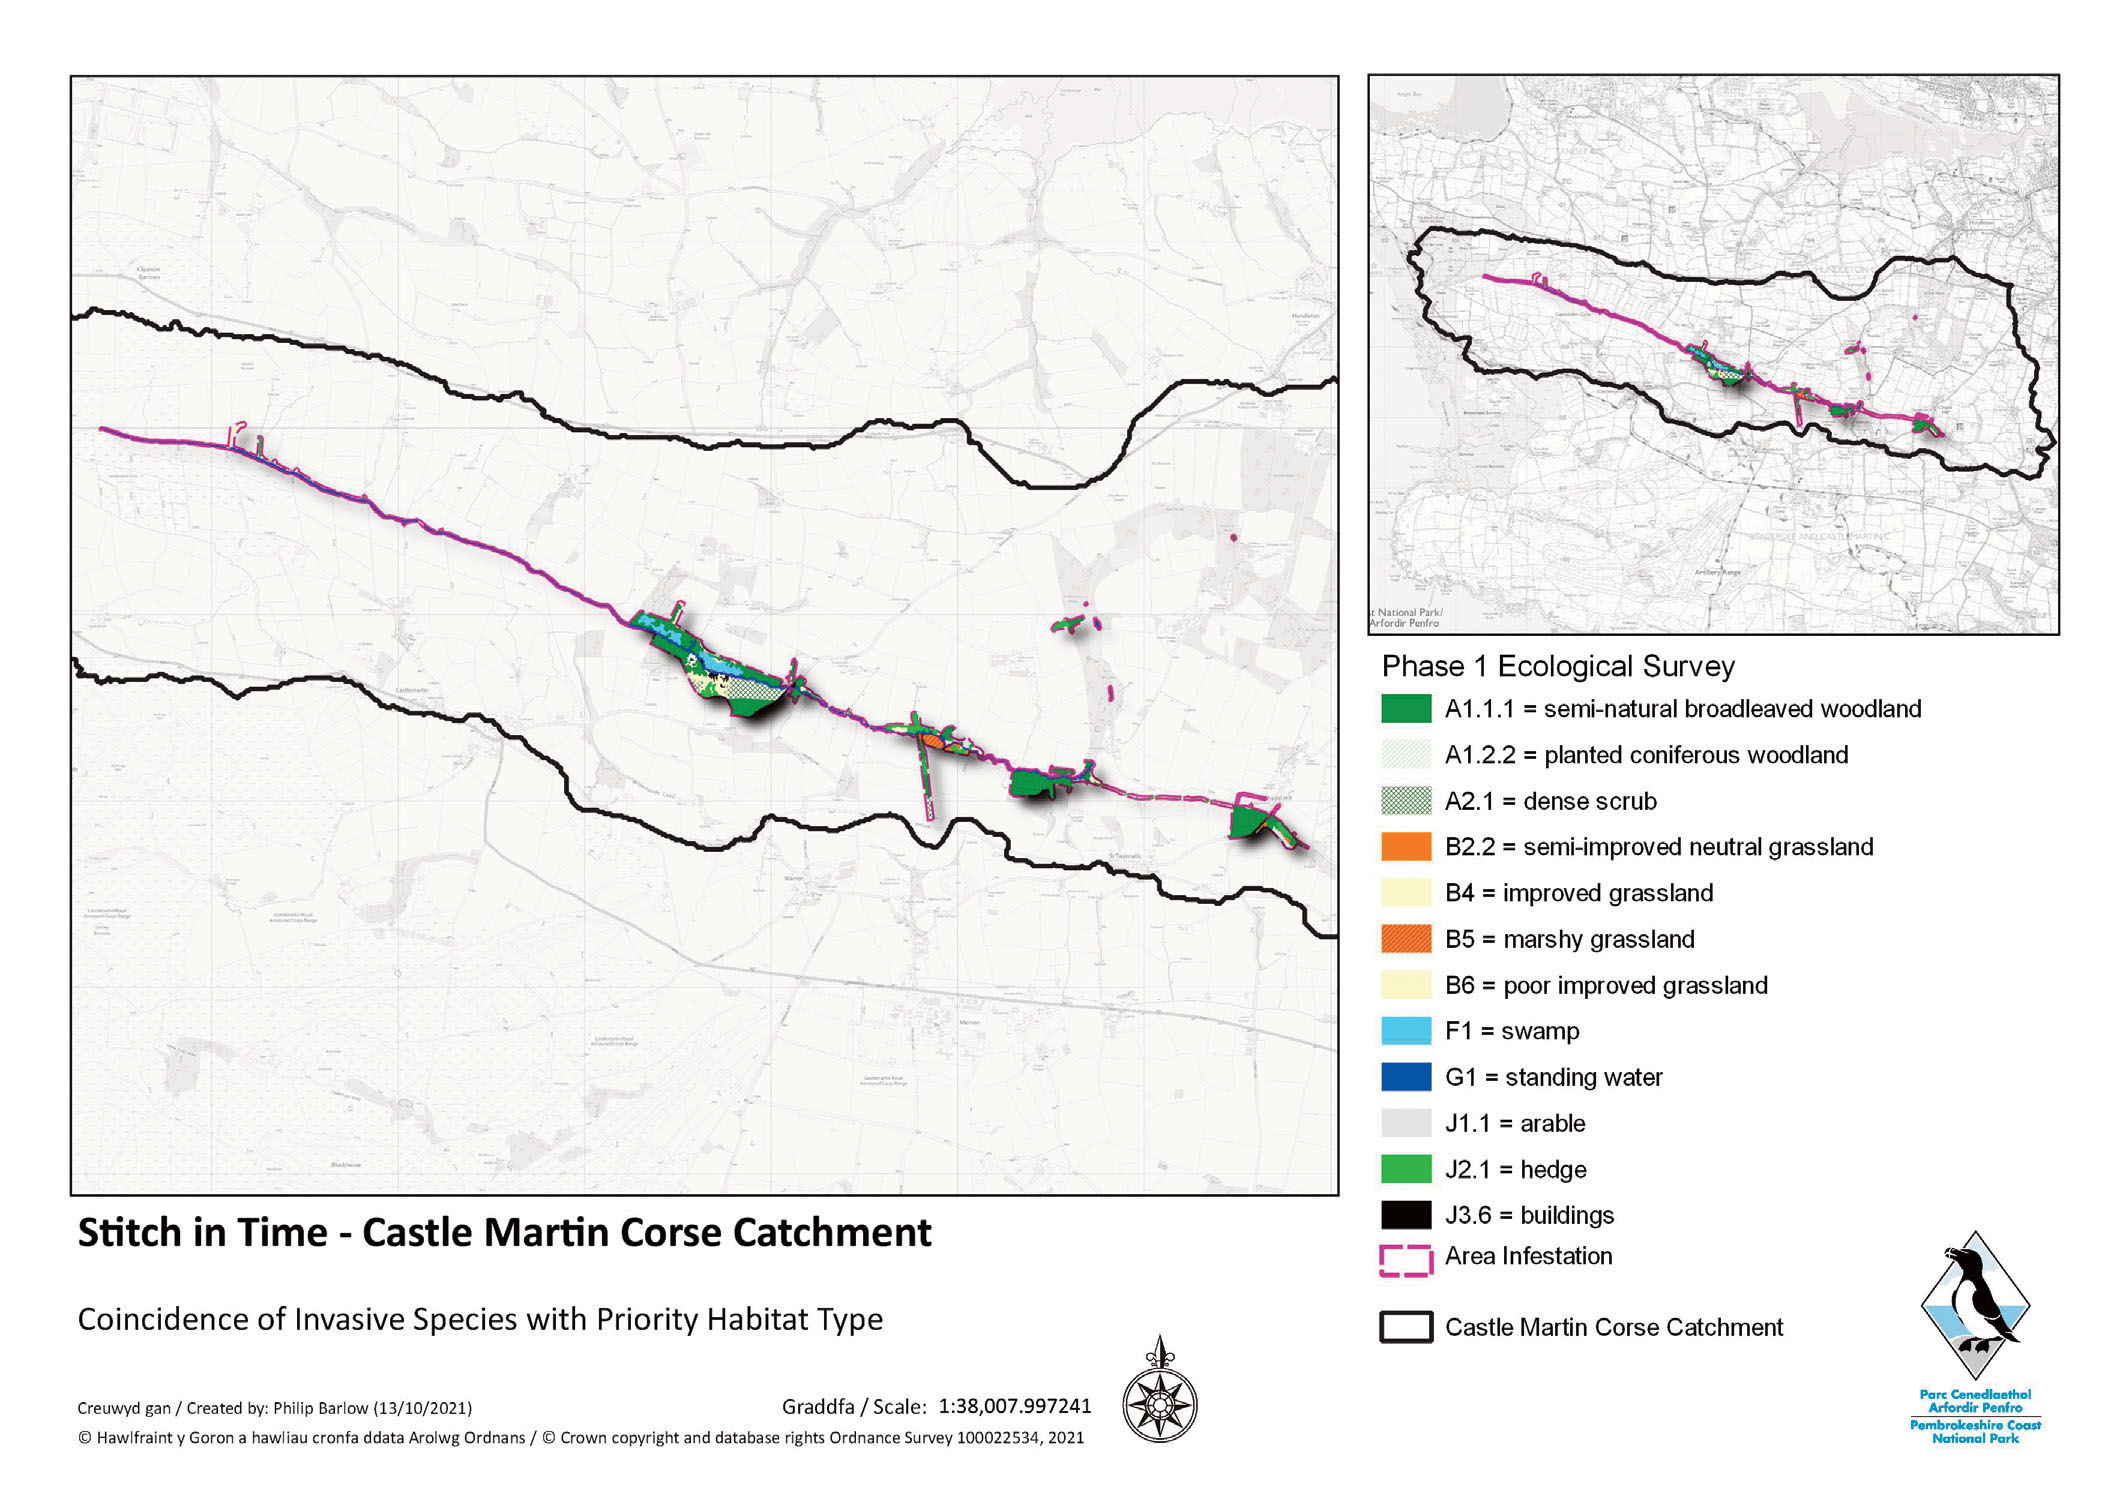 Map of Castlemartin Corse catchment showing coincidence of Invasive Species with Priority Habitat Type